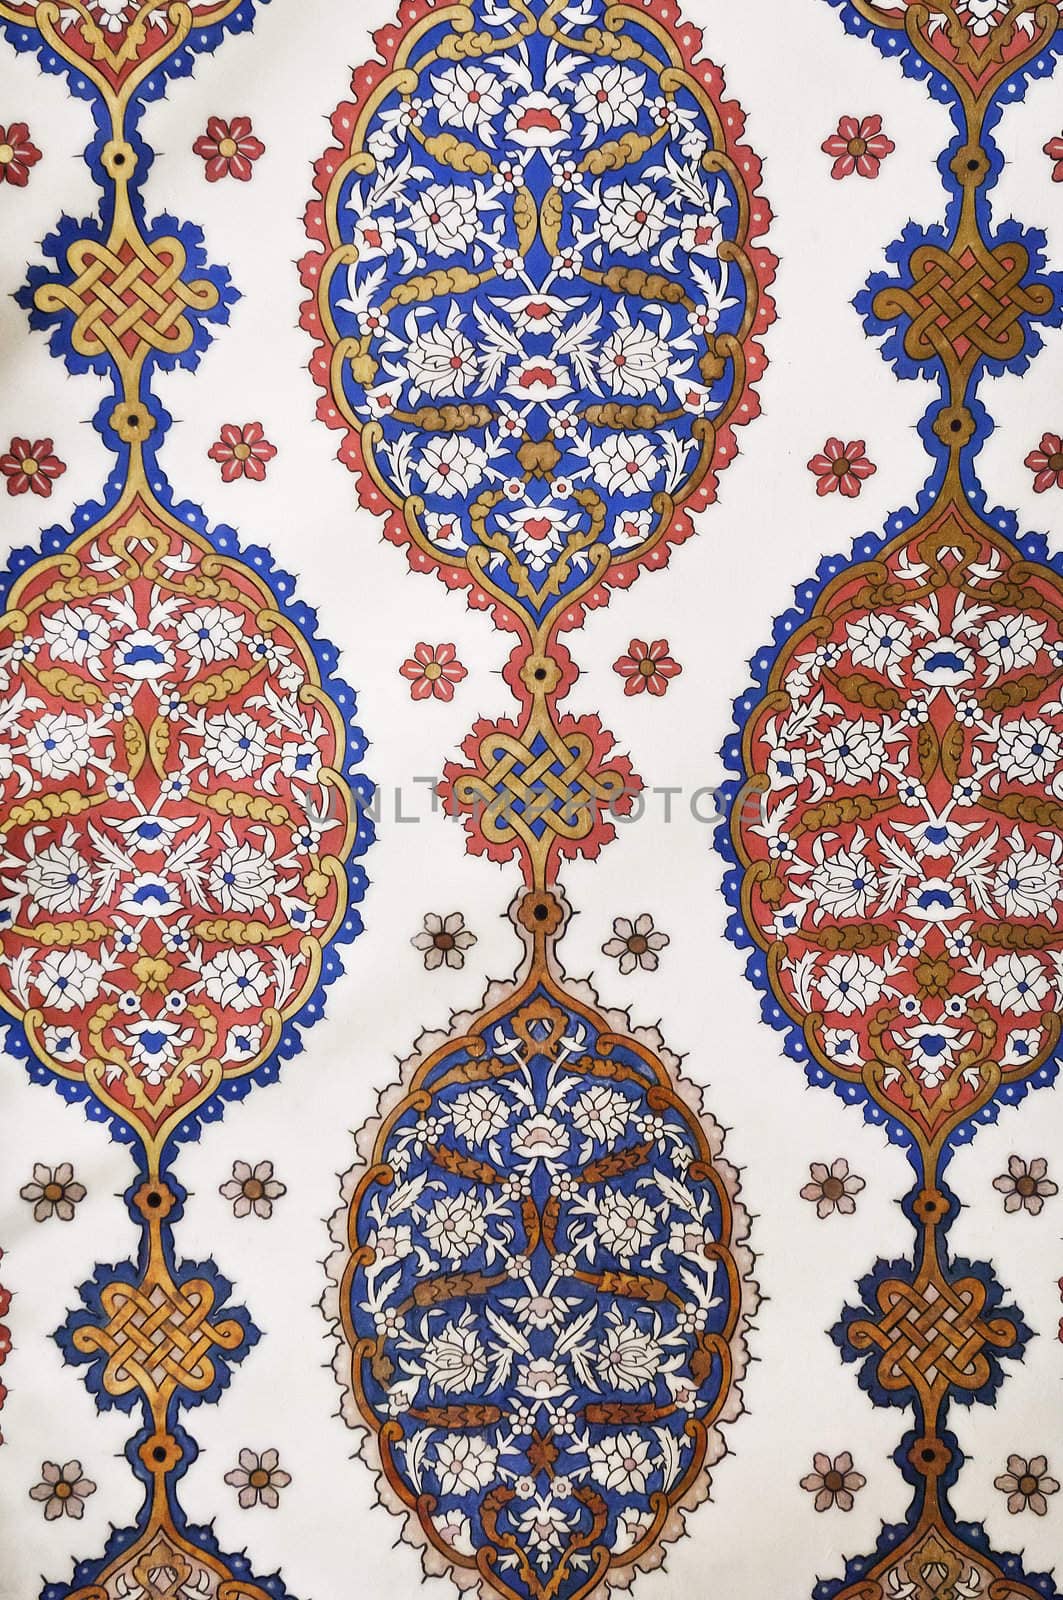 Beautiful and colourful turkish tiles. This is a traditional pattern and style used in Turkey from the Otoman empire. 